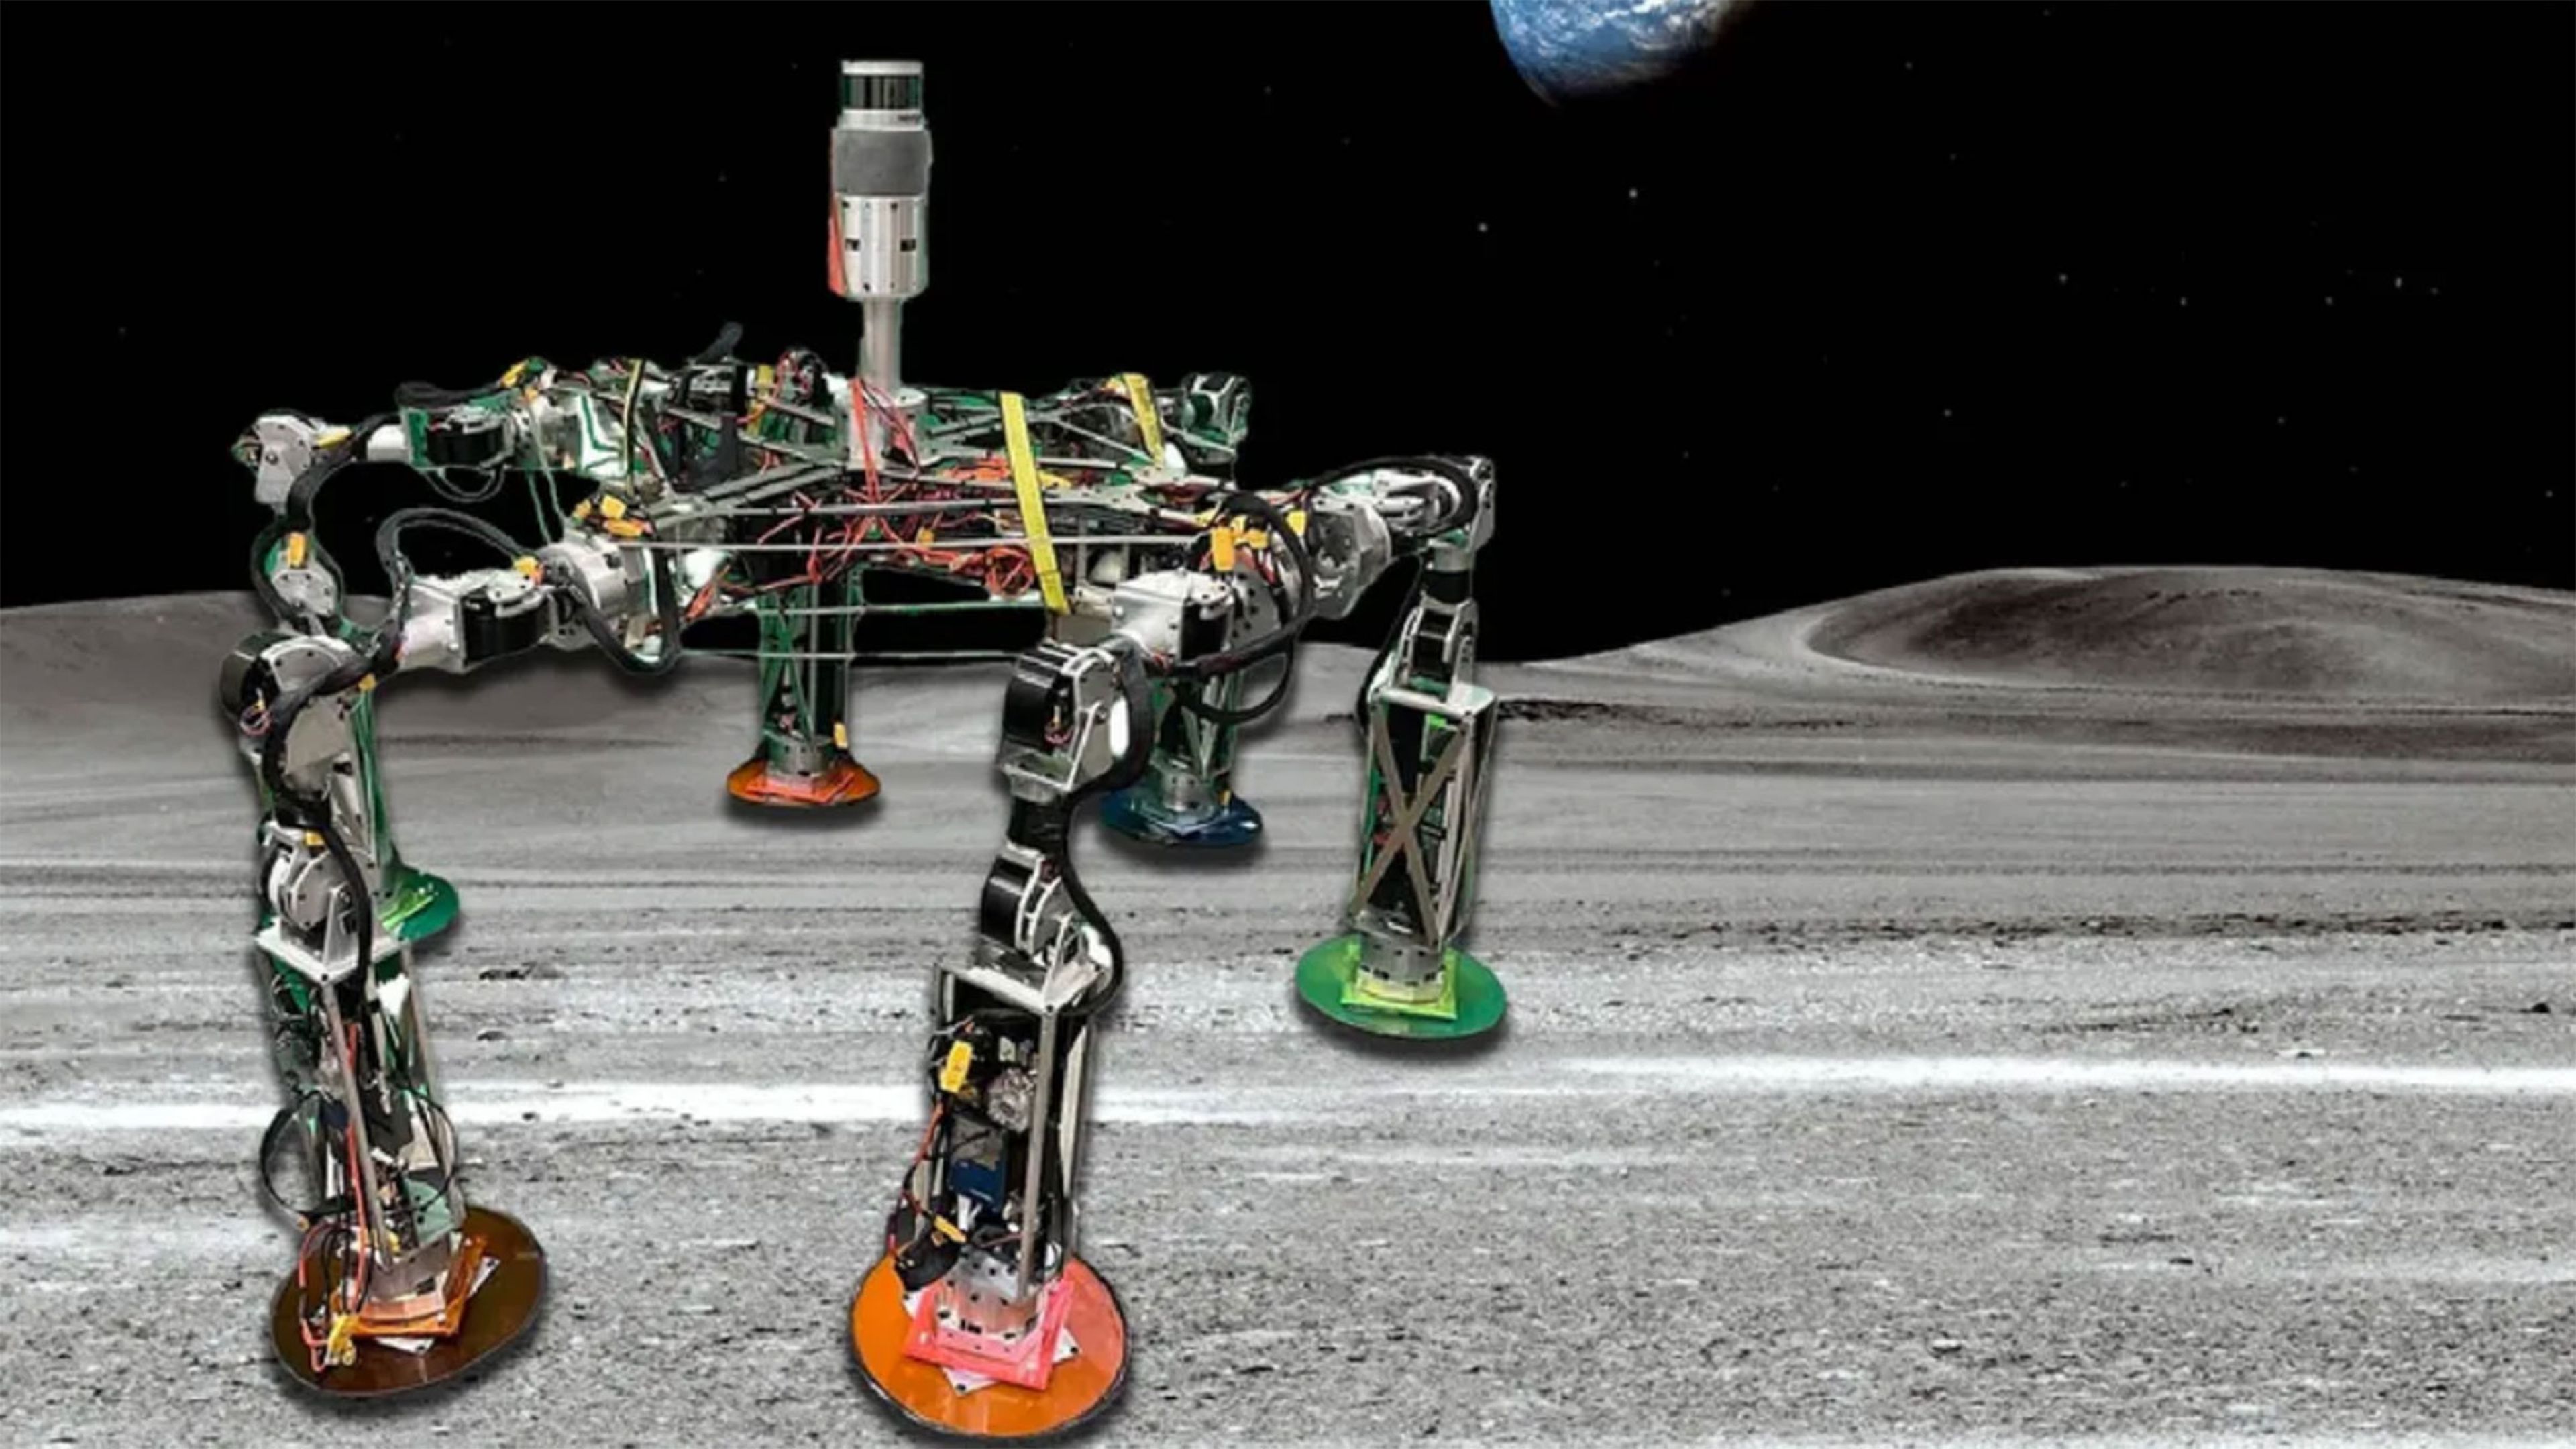 They create a configurable robot capable of combining for various tasks in space